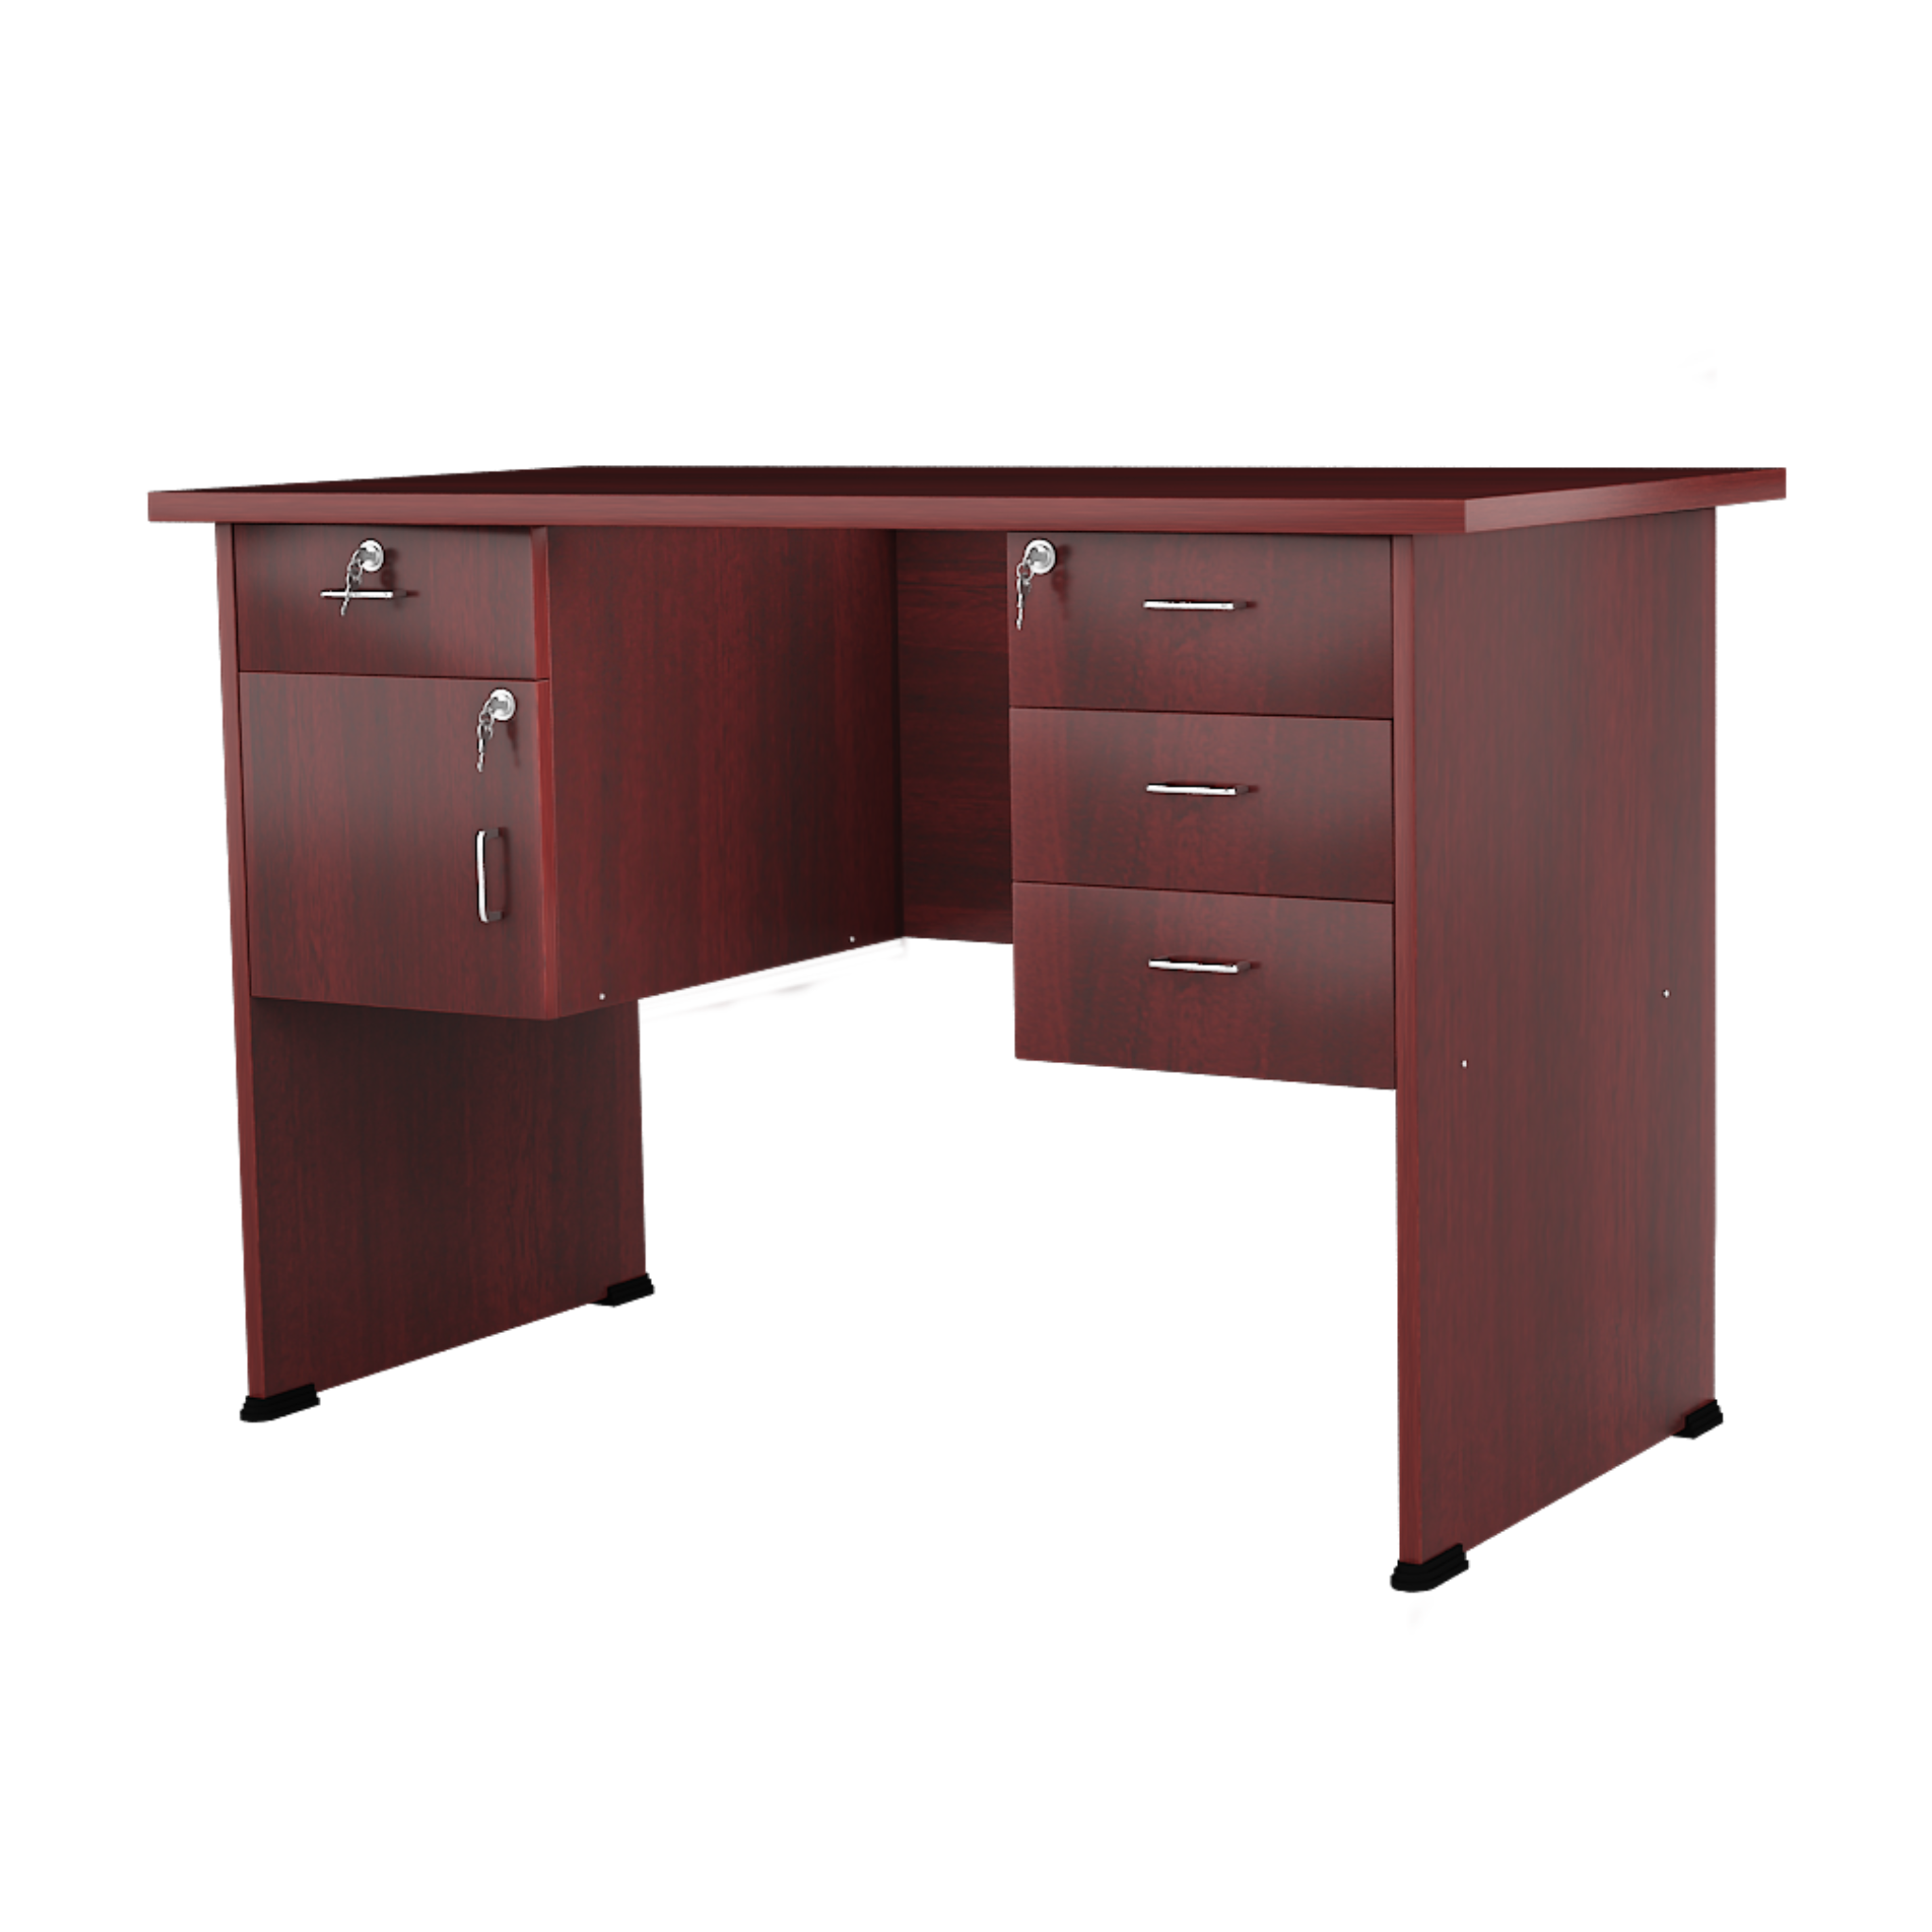 Executive Desk with Drawer Storage